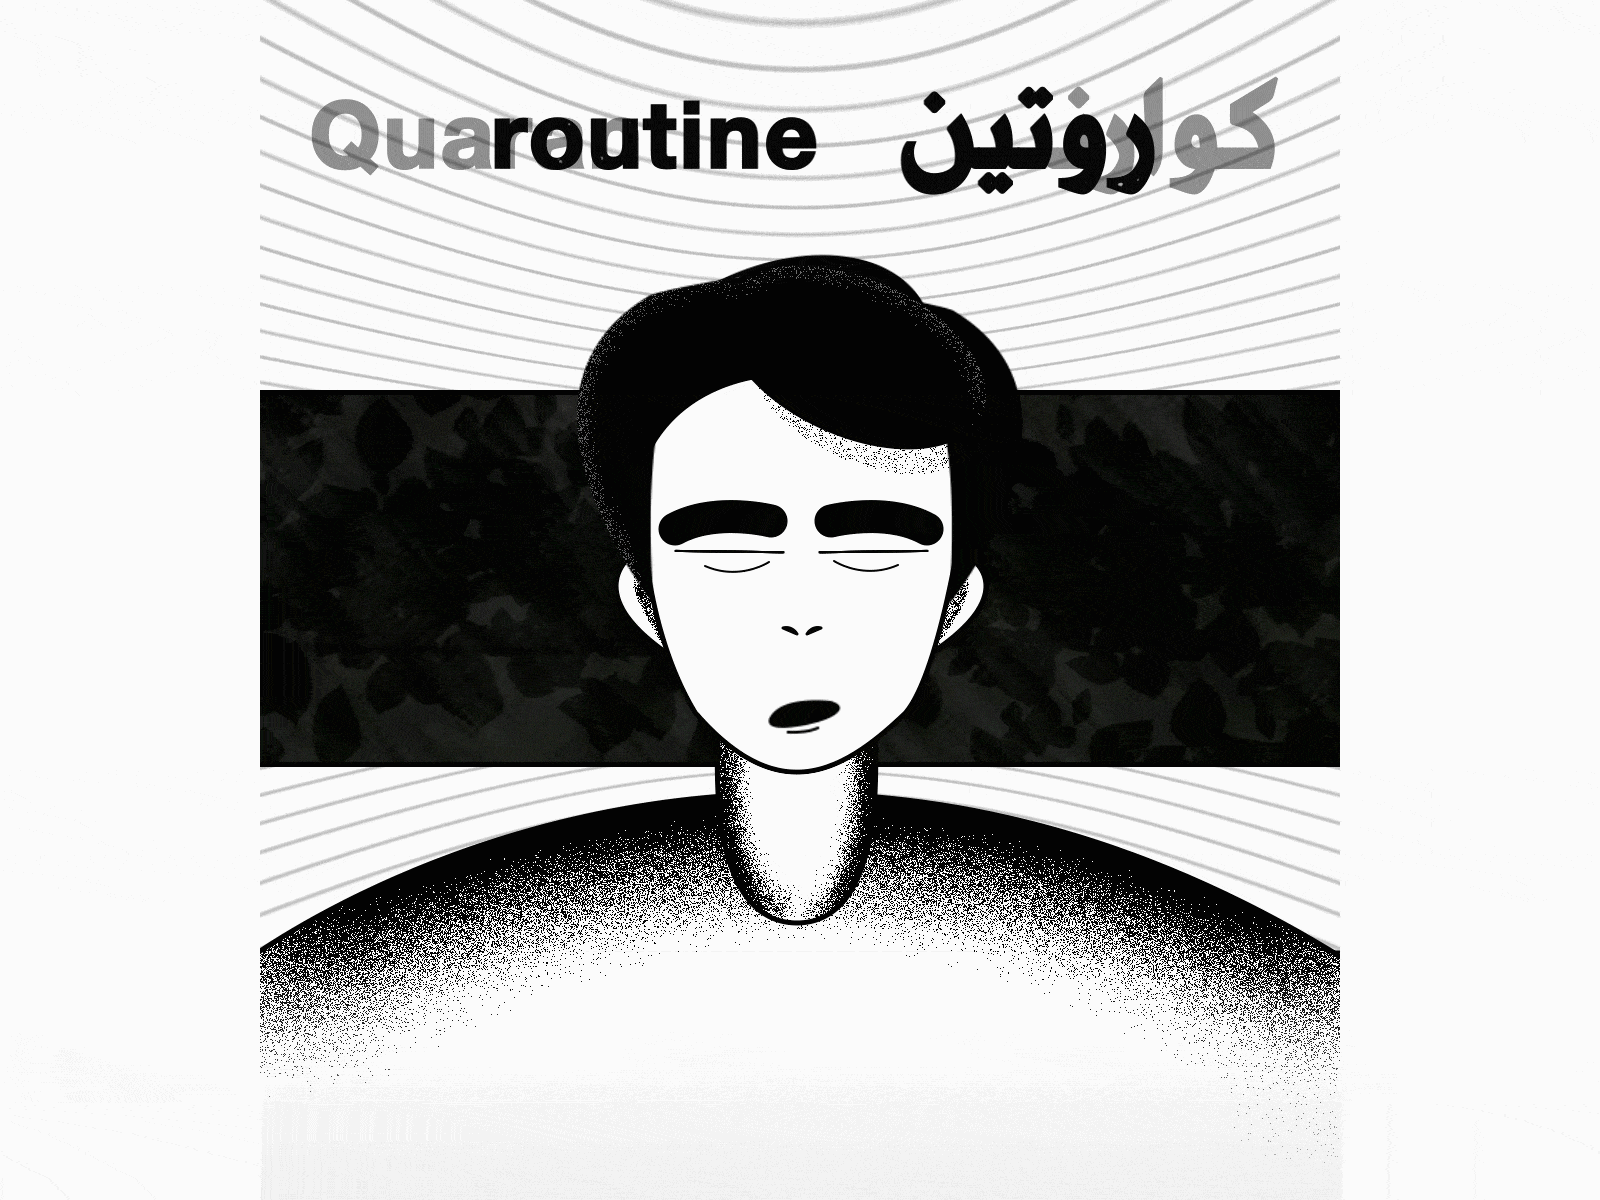 Quarantine Routine abstract after effects aftereffects character coronavirus covid19 daily design gif loop motiongraphics photoshop quarantine routine seamless social typography workfromhome